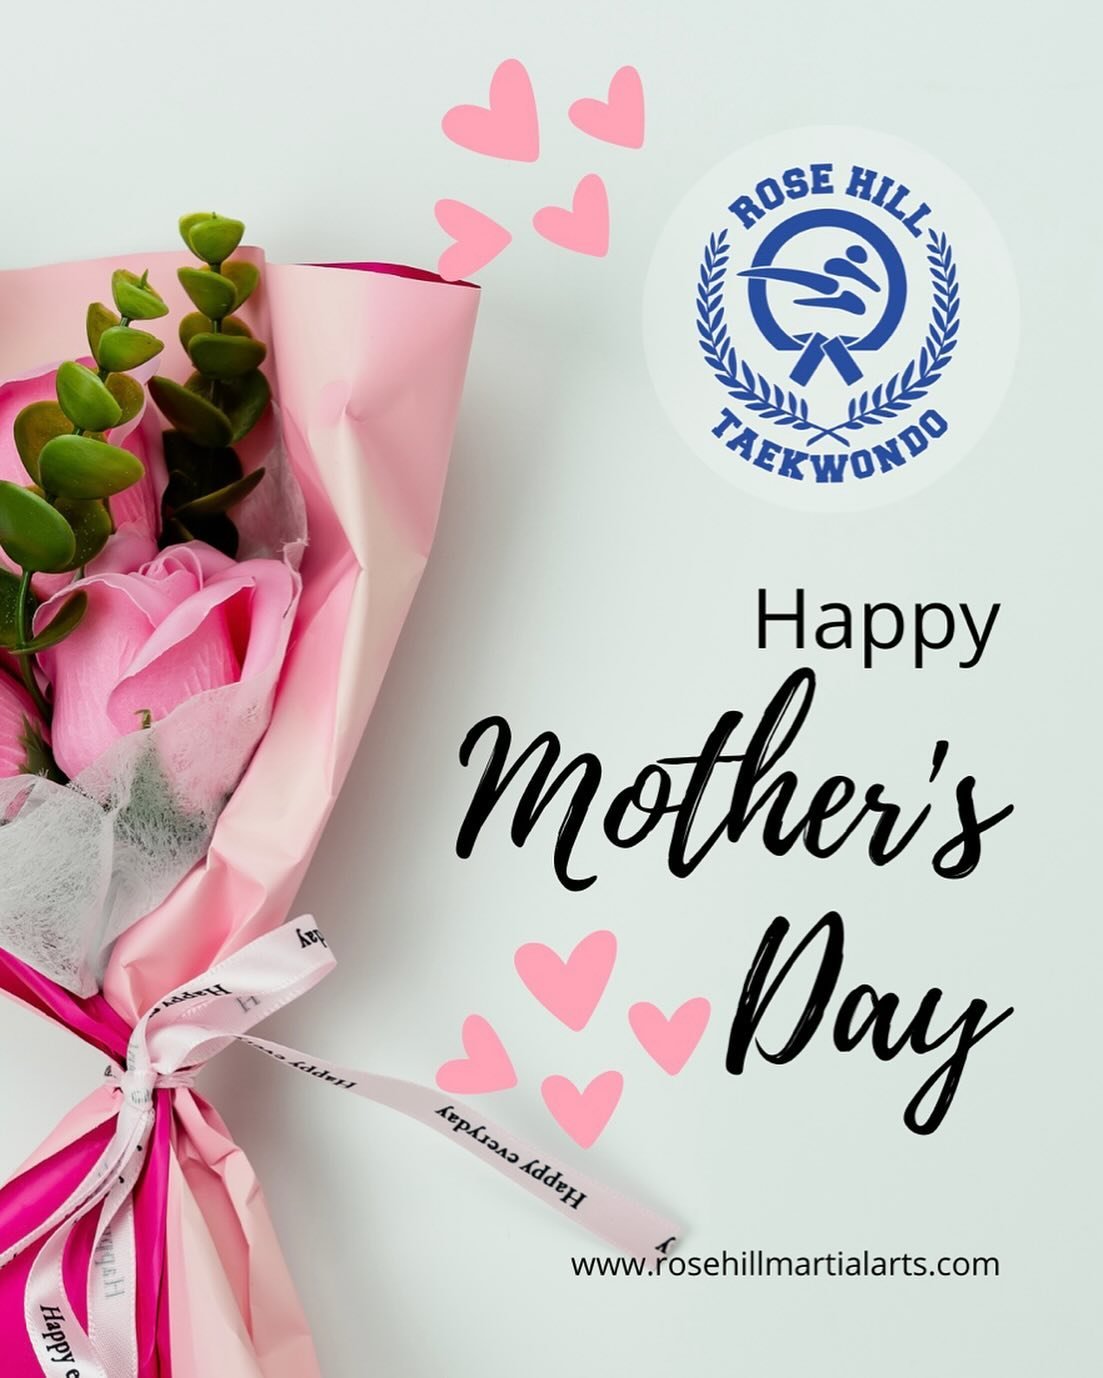 Happy Mother&rsquo;s Day to all the incredible moms who pack sparring gear and show up to support their kids in class every week! A special shout out to our martial arts moms who bring their energy and skills to the mats. We appreciate you all and wi